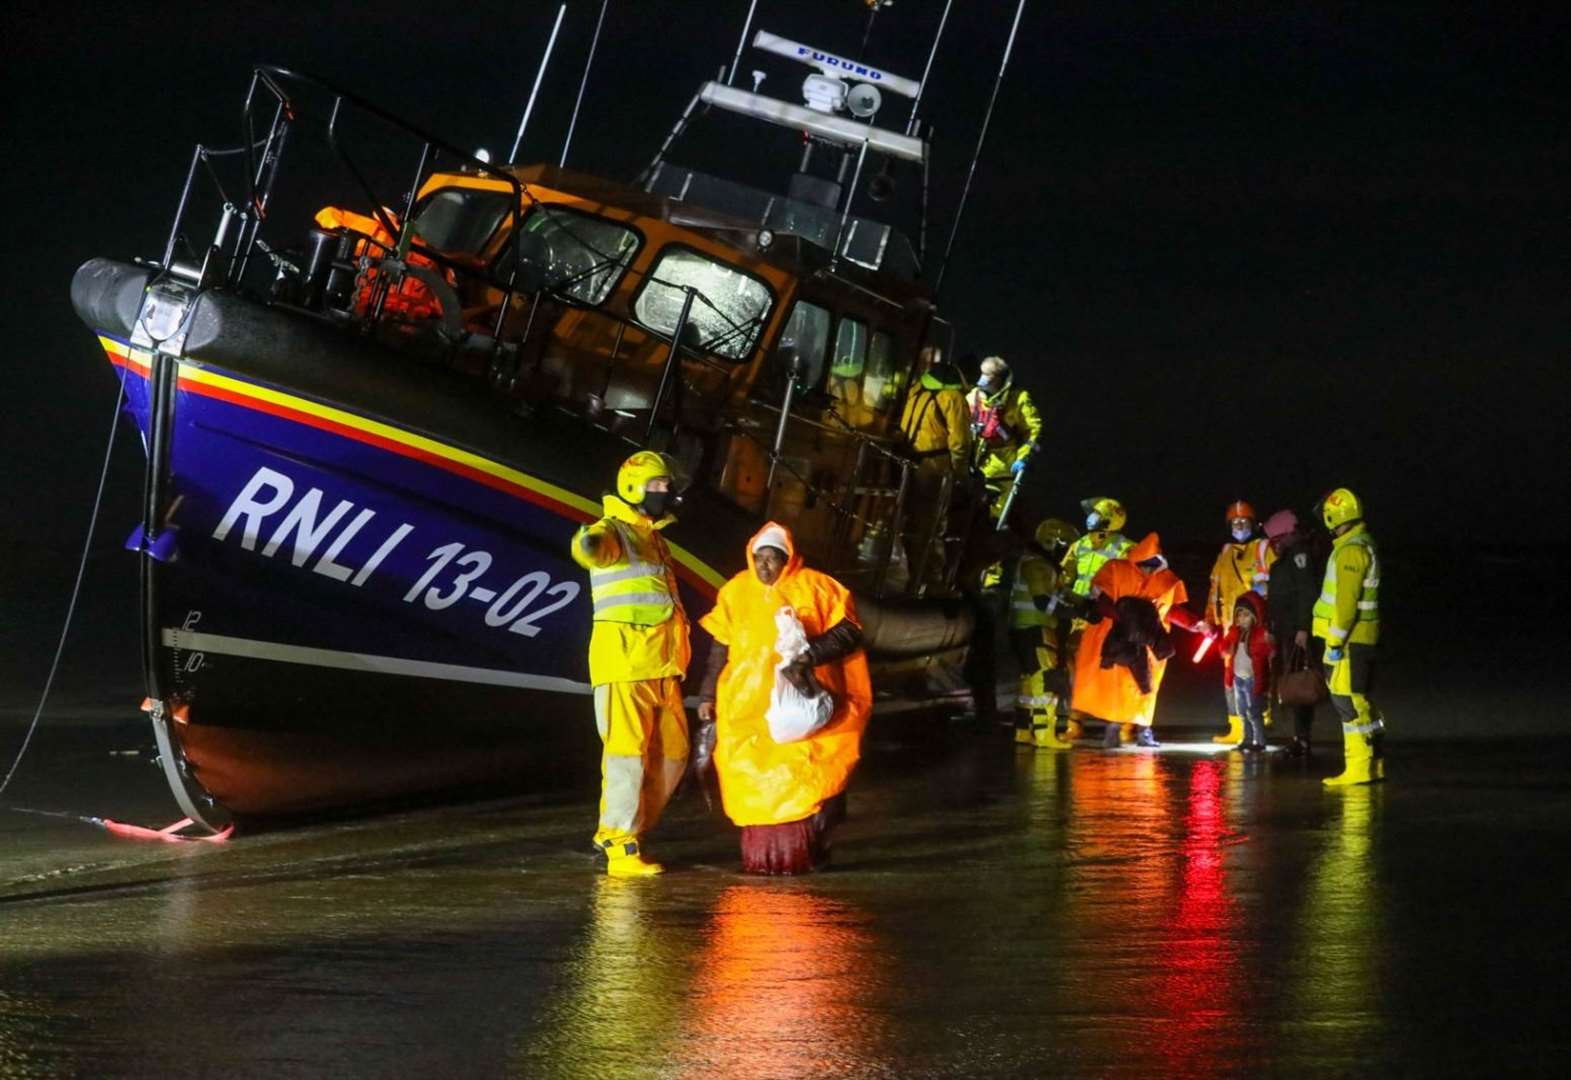 Pregnant woman among group rescued as sea temperature plummets